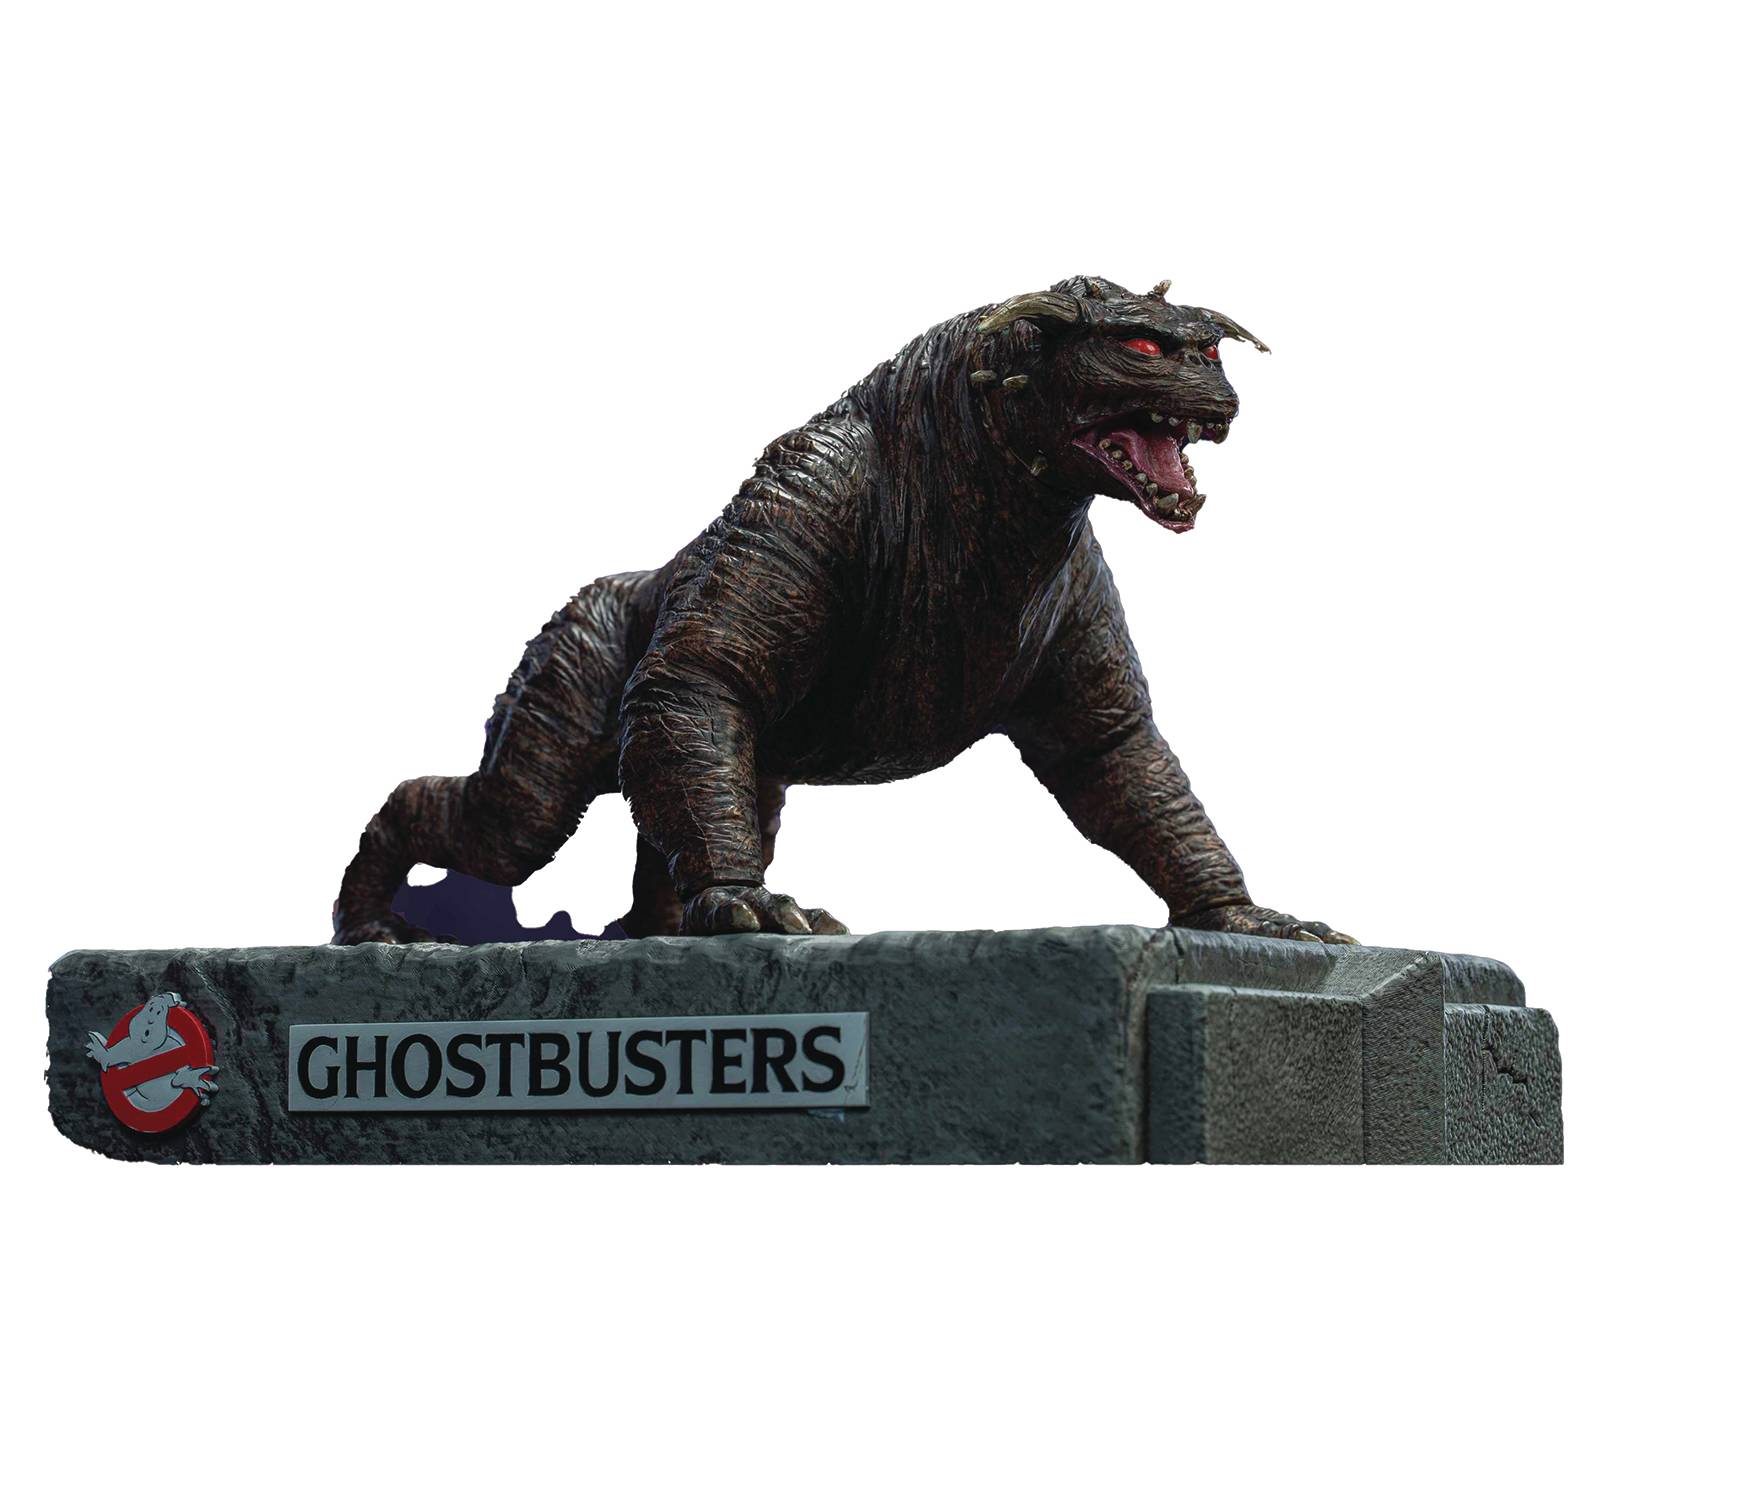 GHOSTBUSTERS ZUUL & SLIMER 1/8 SCALE SOFT VINYL TWIN PK DLX